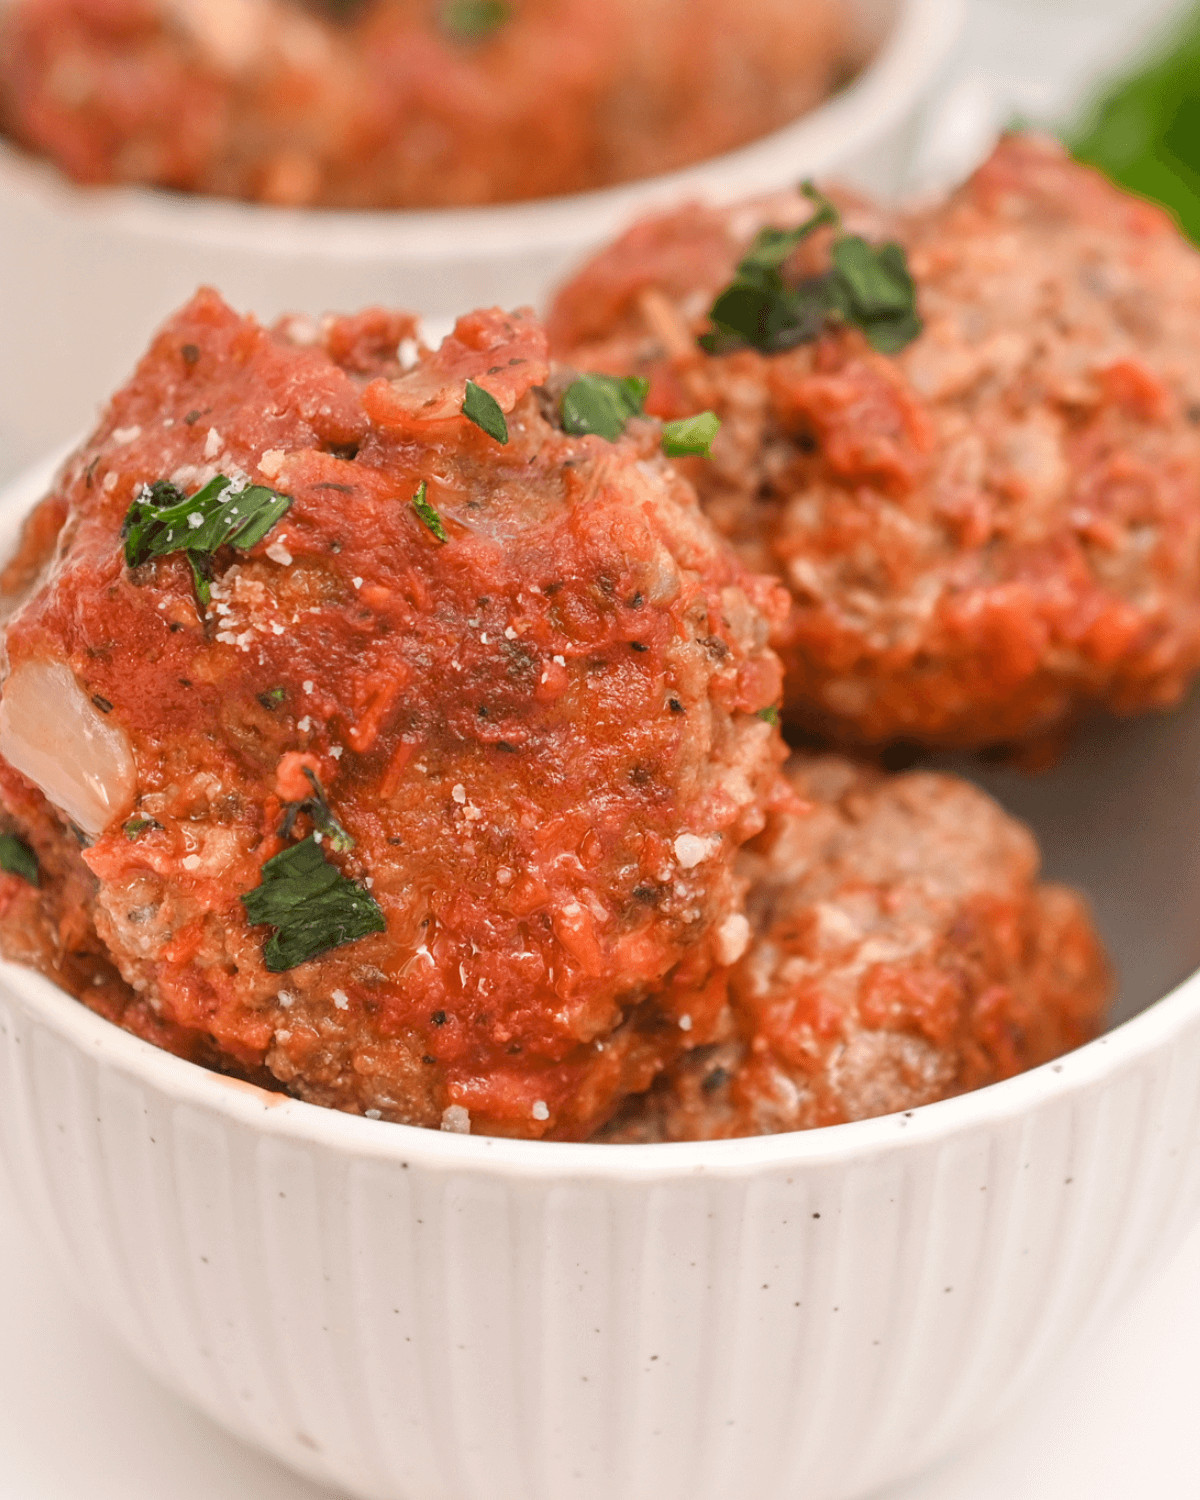 Italian sausage meatballs in a white bowl with sauce and parsley.